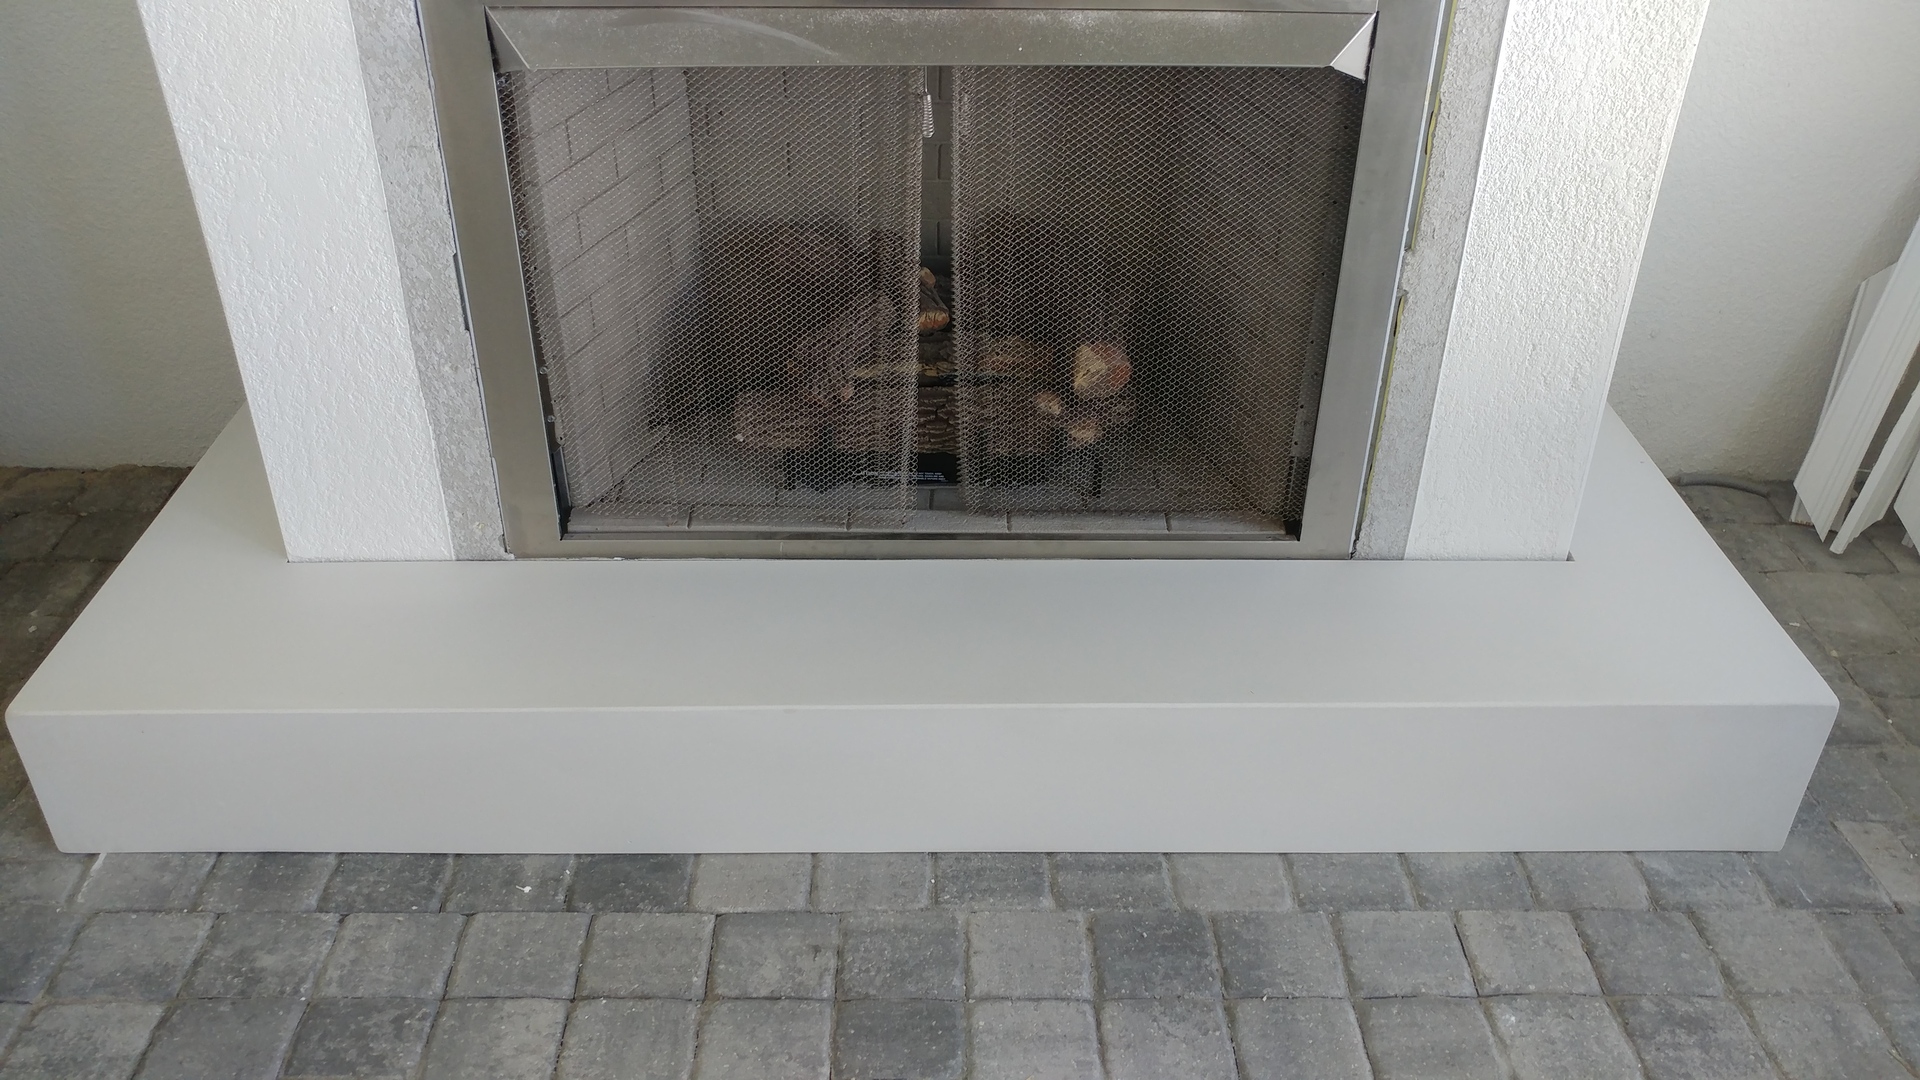 While Fireplace Hearth